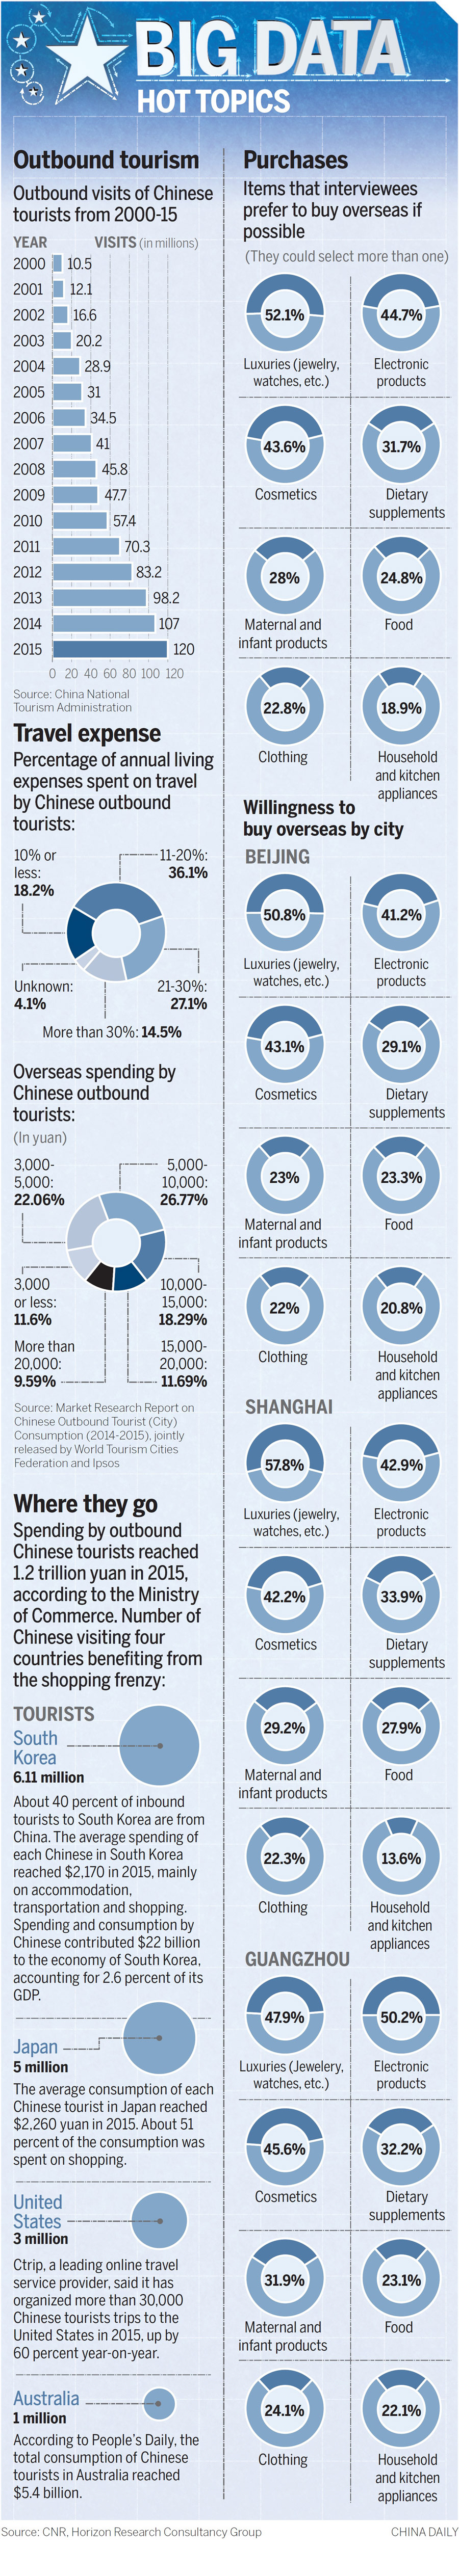 Chinese tourists spend big overseas